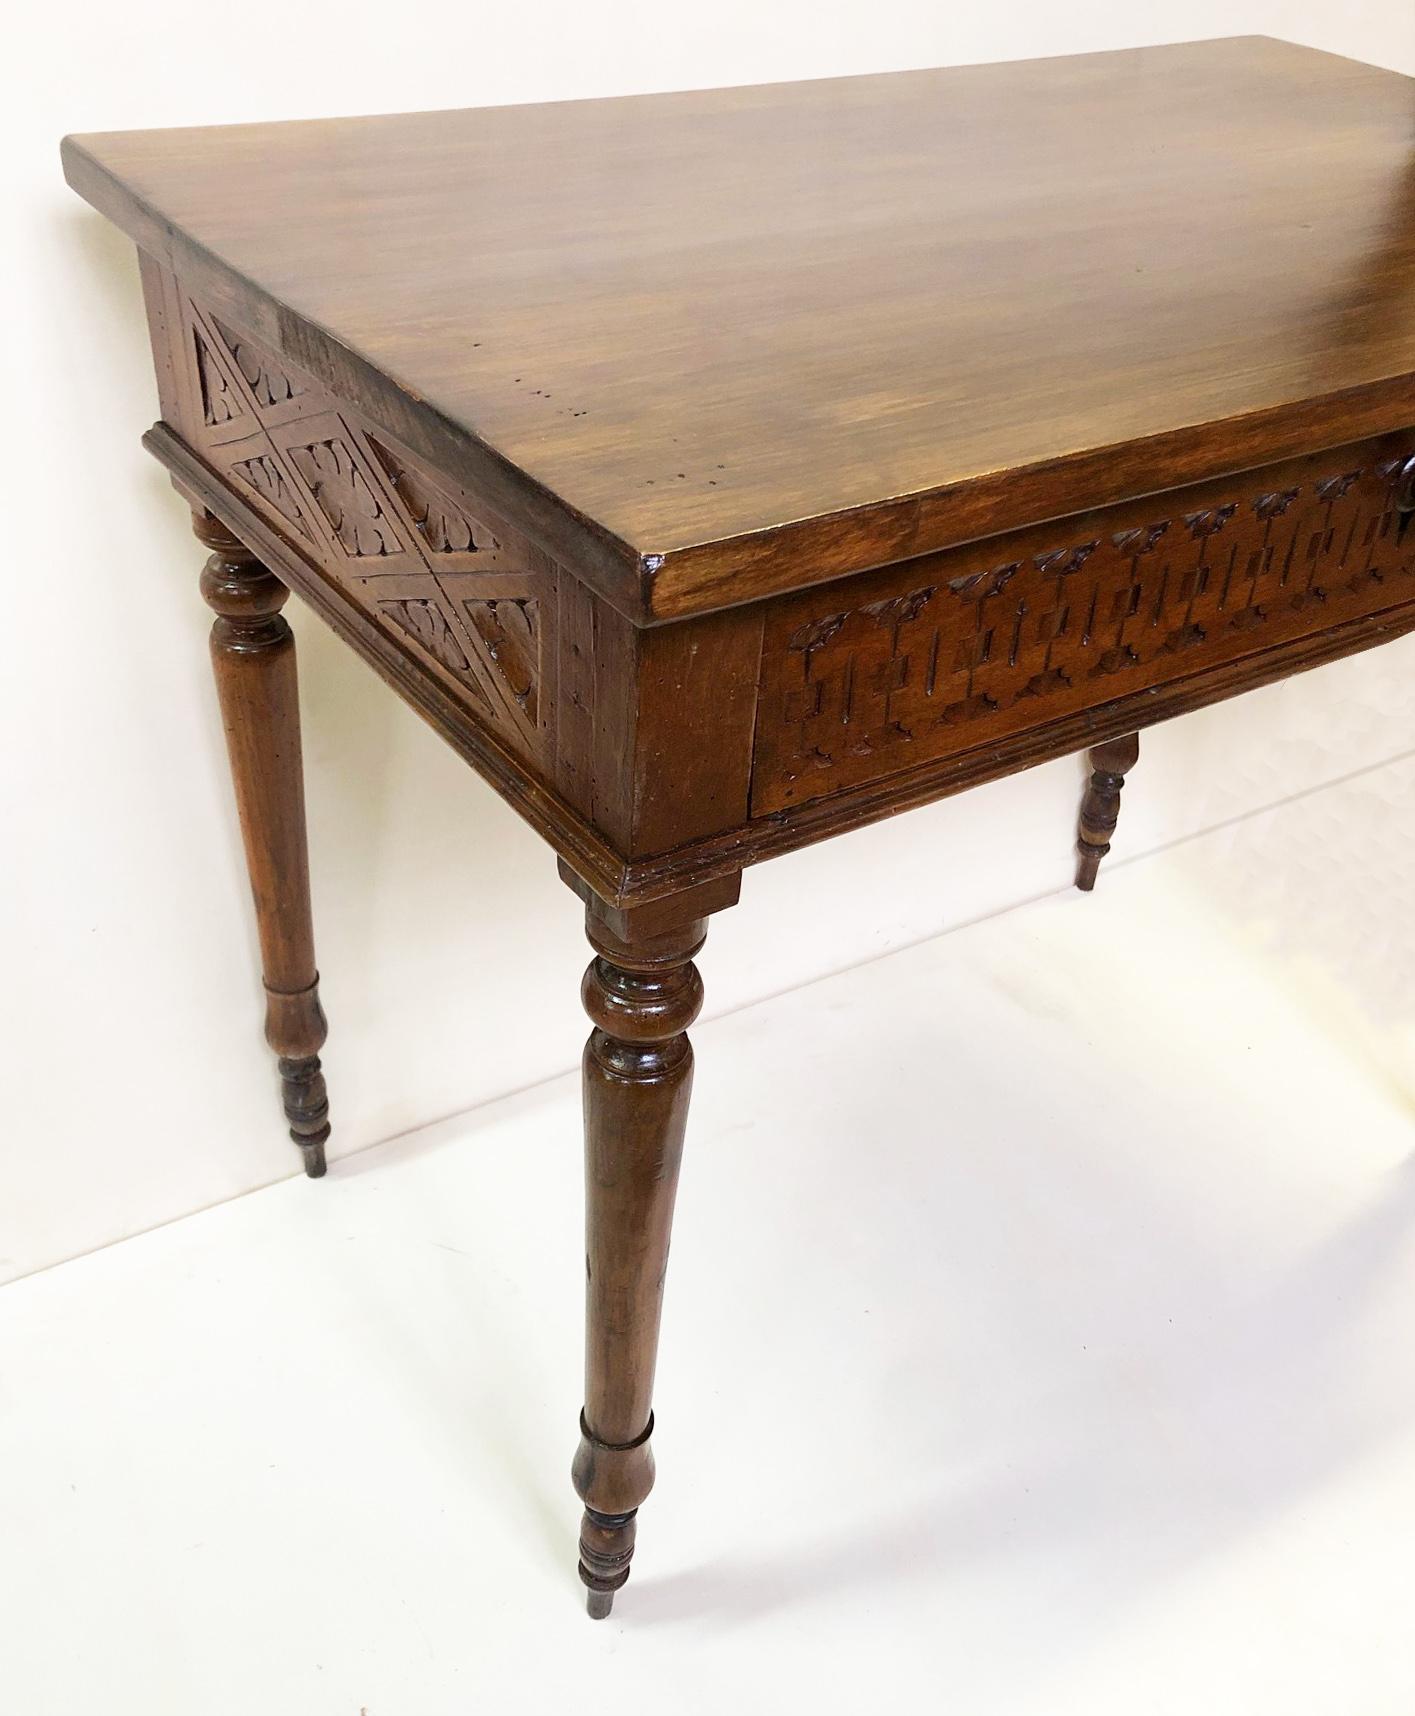 Country Original Italian Desk Table in Walnut with Perimeter Carvings from 1880